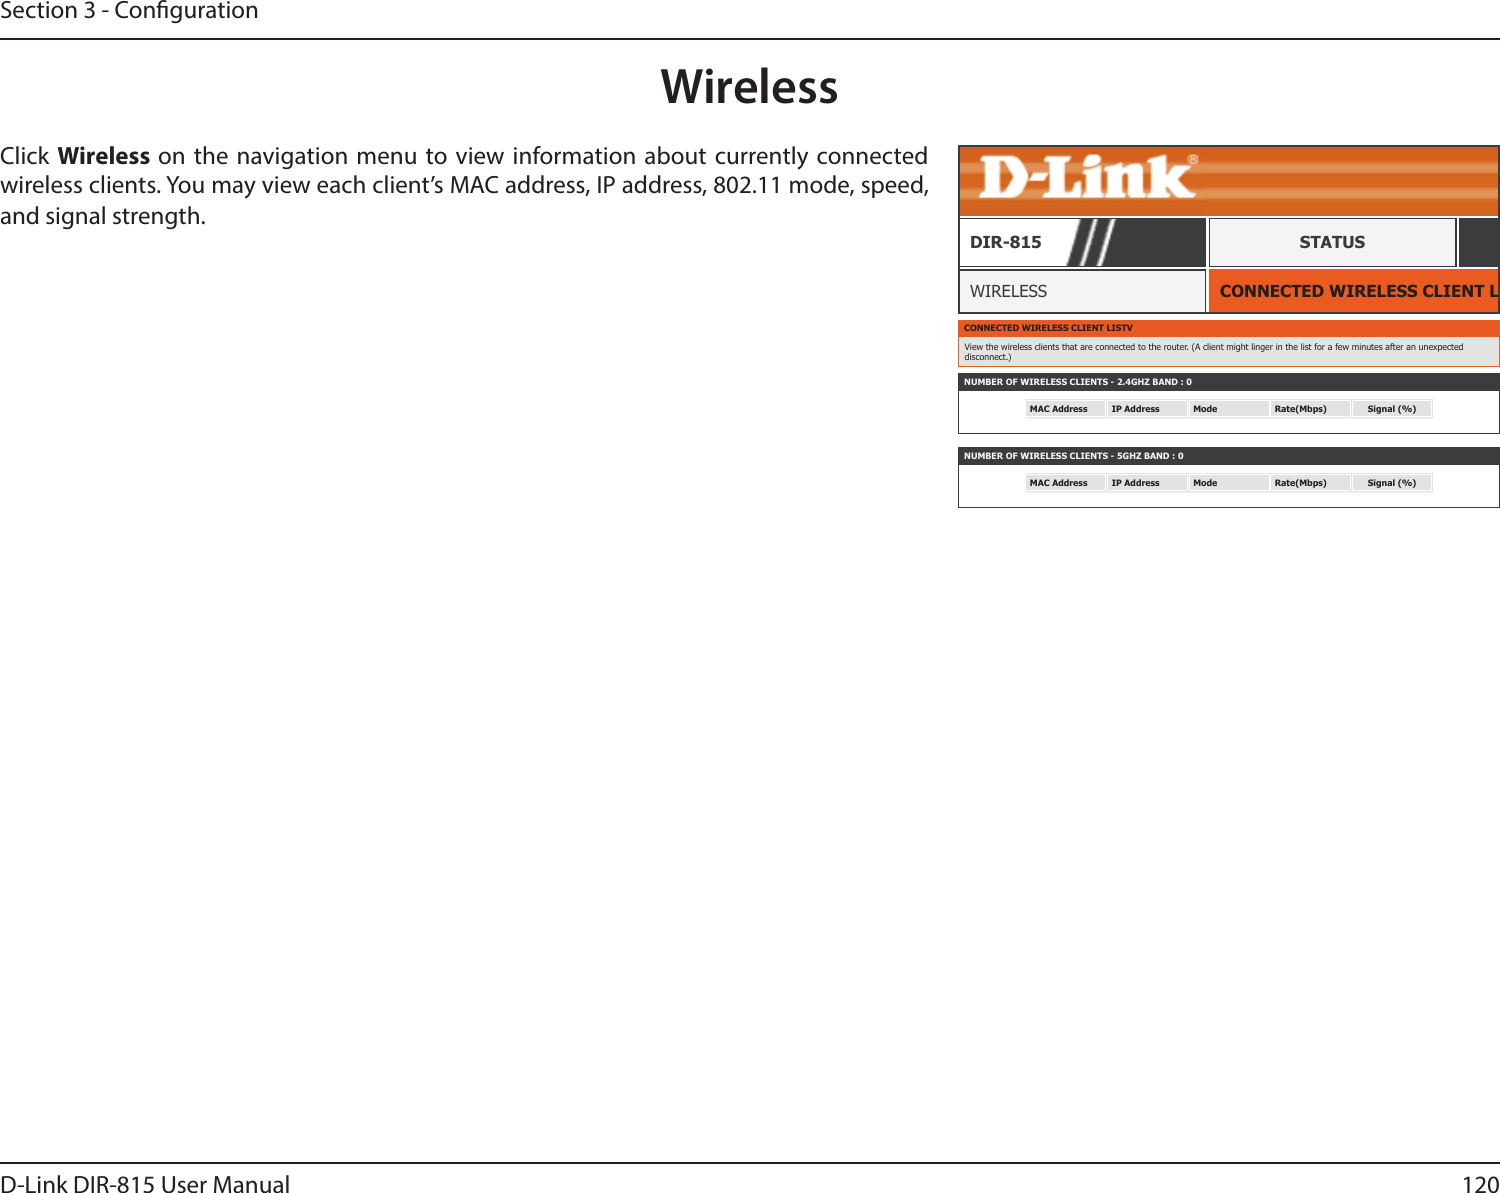 120D-Link DIR-815 User ManualSection 3 - CongurationWirelessCONNECTED WIRELESS CLIENT LISTWIRELESSDIR-815 STATUSClick Wireless on the navigation menu to view information about currently connected wireless clients. You may view each client’s MAC address, IP address, 802.11 mode, speed, and signal strength.CONNECTED WIRELESS CLIENT LISTVView the wireless clients that are connected to the router. (A client might linger in the list for a few minutes after an unexpected disconnect.)NUMBER OF WIRELESS CLIENTS - 2.4GHZ BAND : 0MAC Address IP Address Mode Rate(Mbps) Signal (%)NUMBER OF WIRELESS CLIENTS - 5GHZ BAND : 0MAC Address IP Address Mode Rate(Mbps) Signal (%)